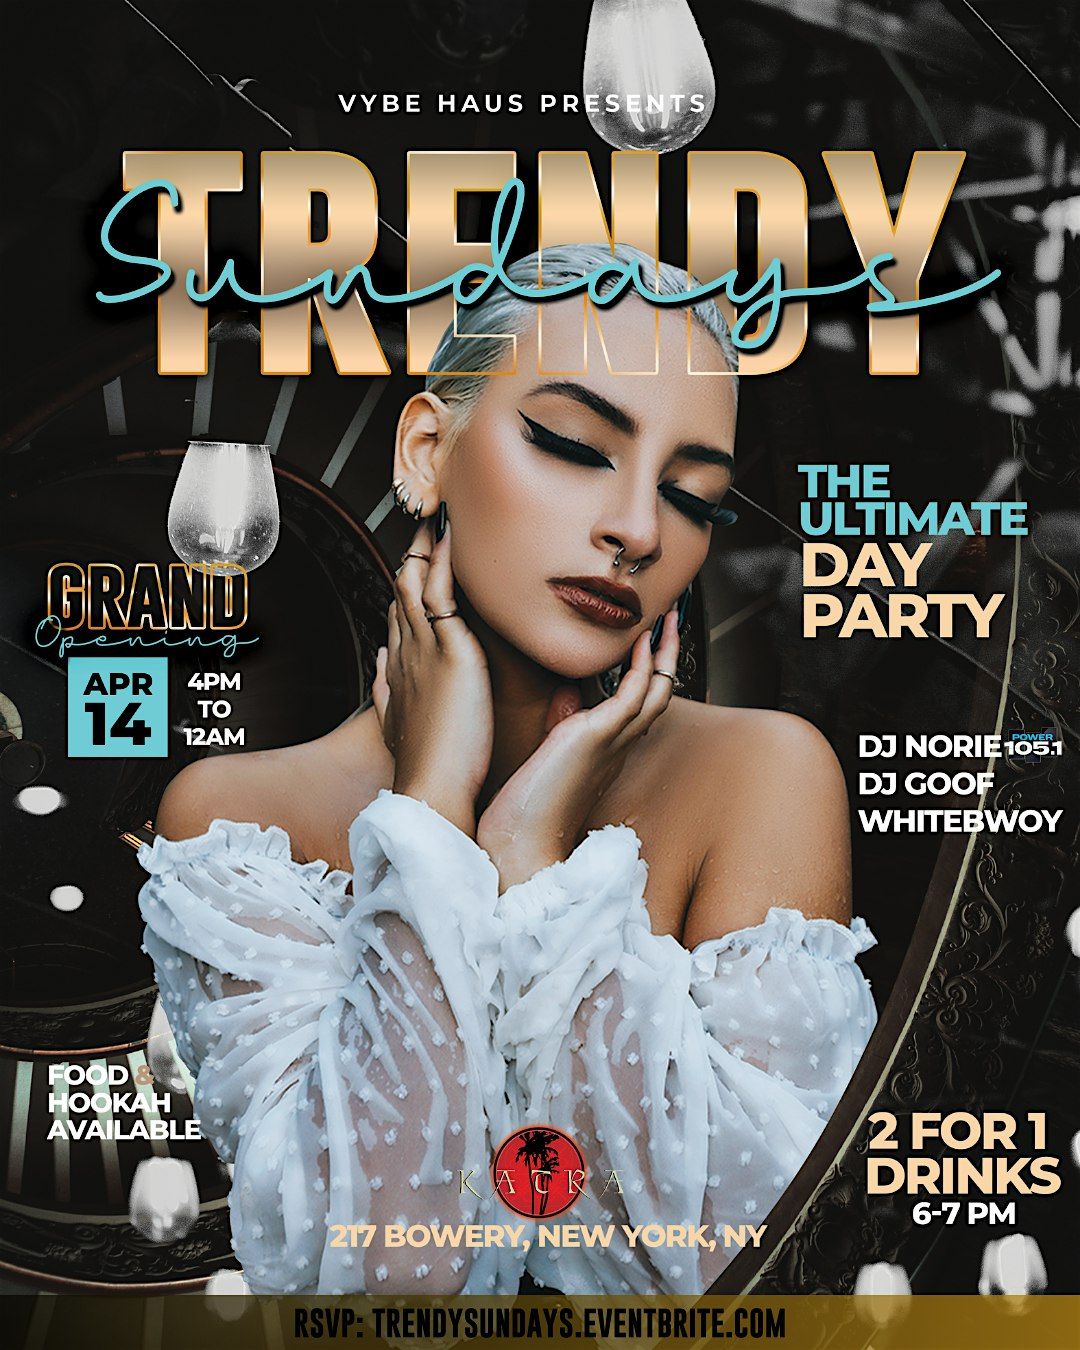 TRENDY SUNDAYS! DAY PARTY EDITION